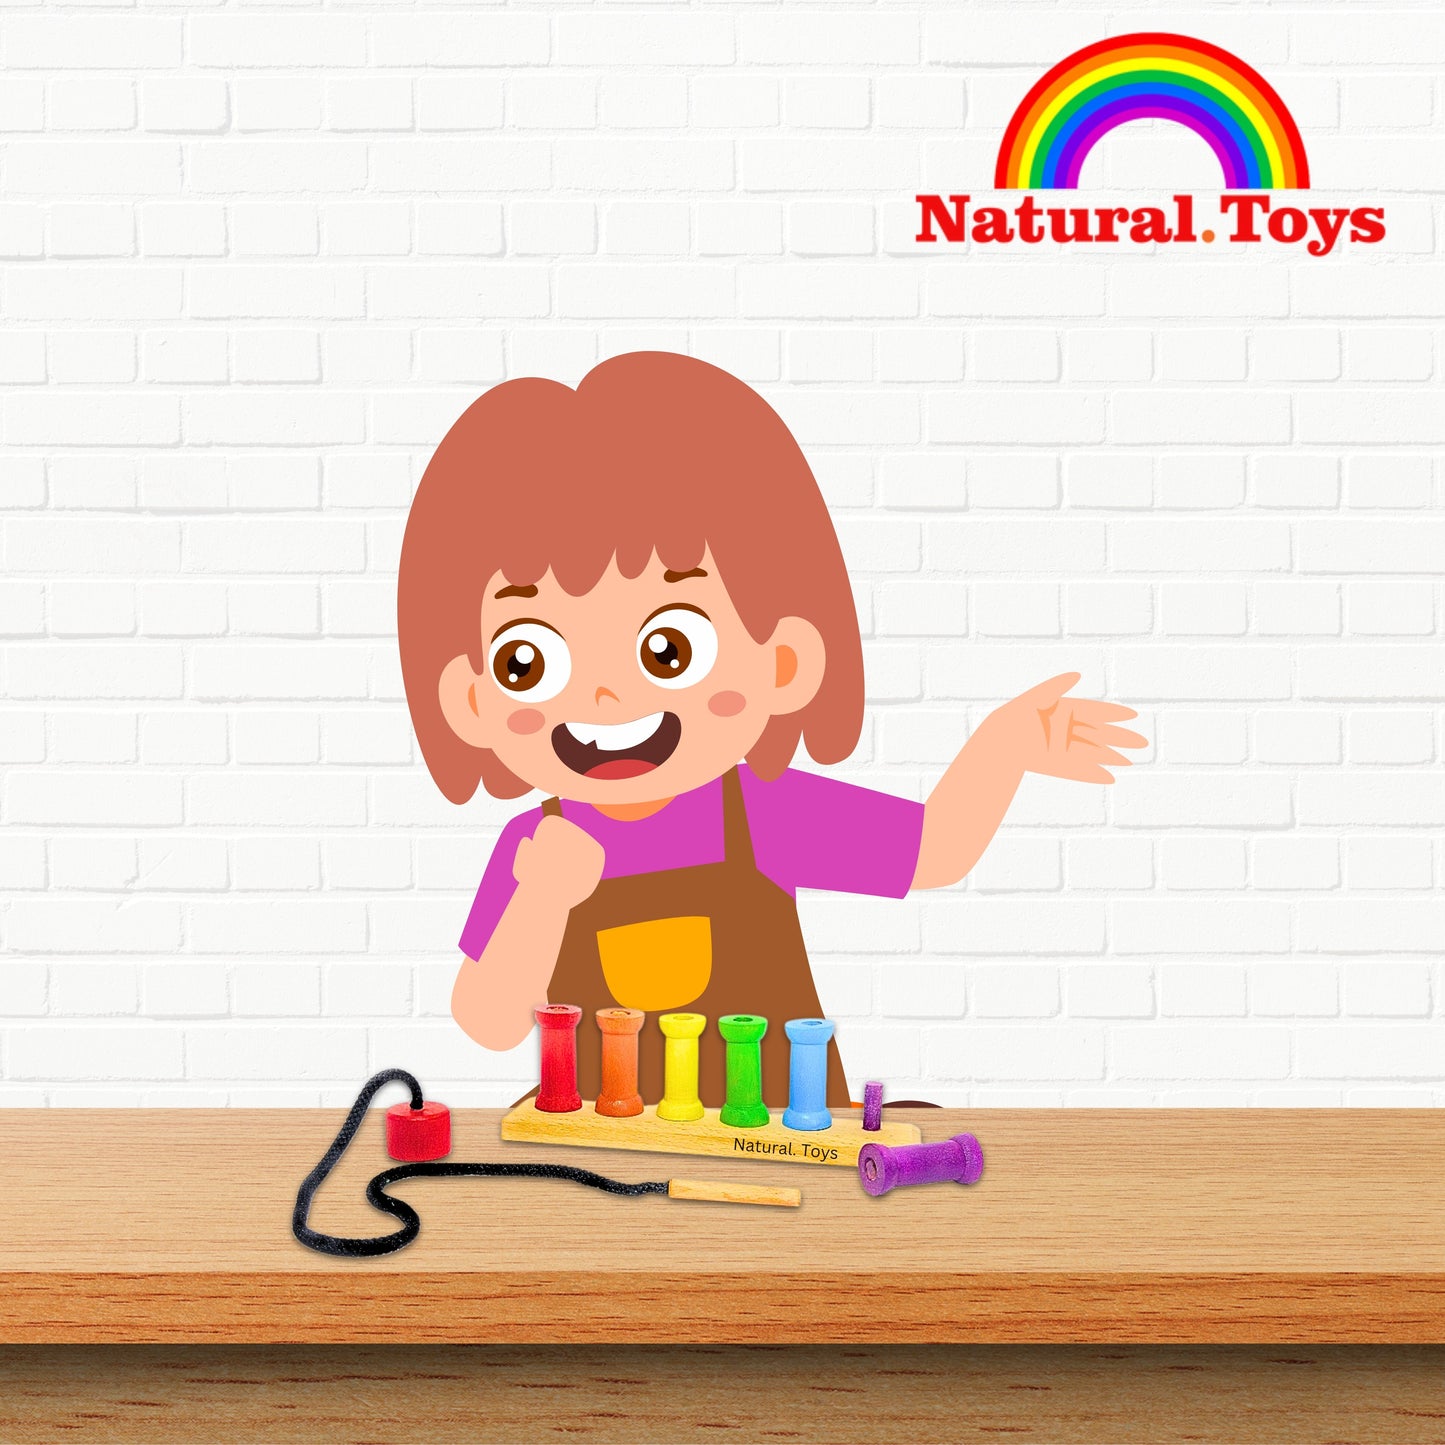 Buy Wooden Lacing Toy with 6 Lacing Pegs and Needle | Natural Toys